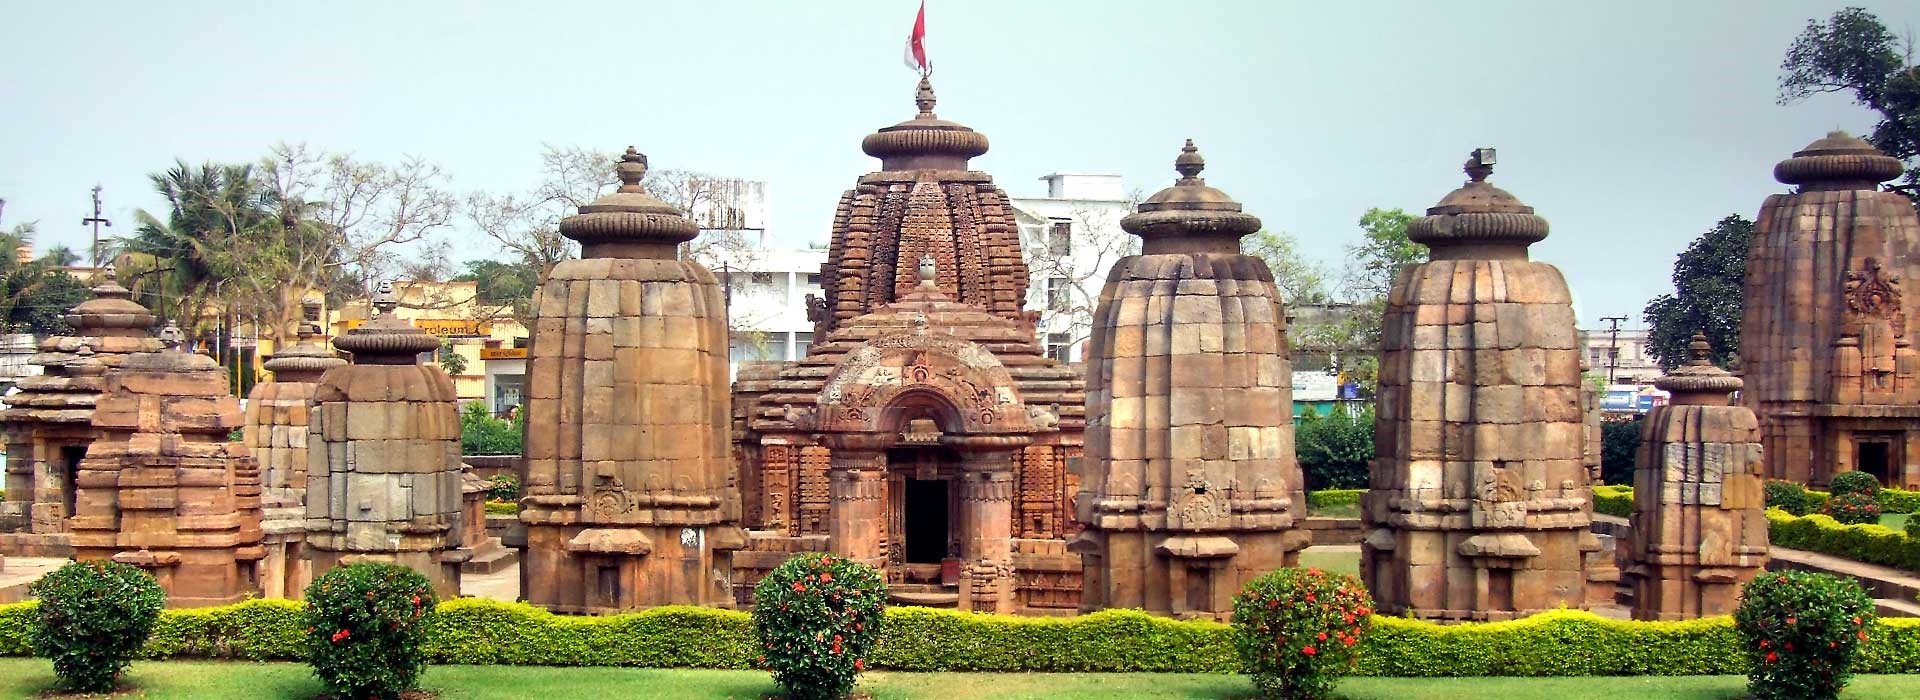 Odisha_The_State_of_Temples_in_India